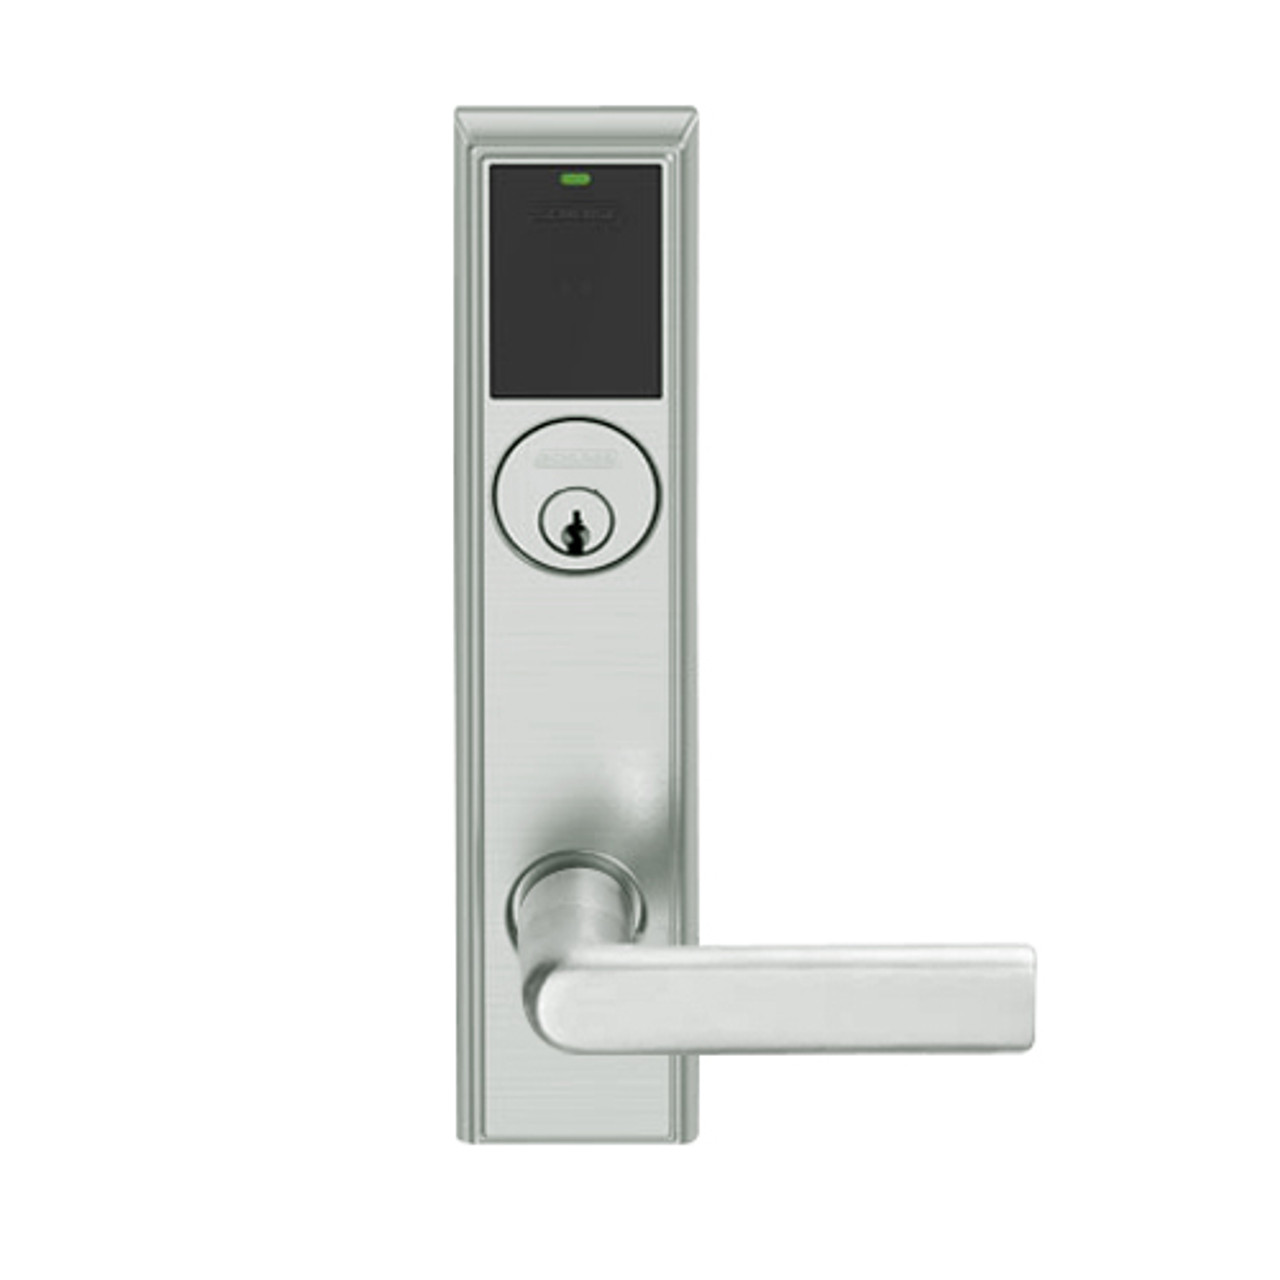 LEMB-ADD-P-01-619 Schlage Privacy/Office Wireless Addison Mortise Lock with Push Button, LED and 01 Lever in Satin Nickel